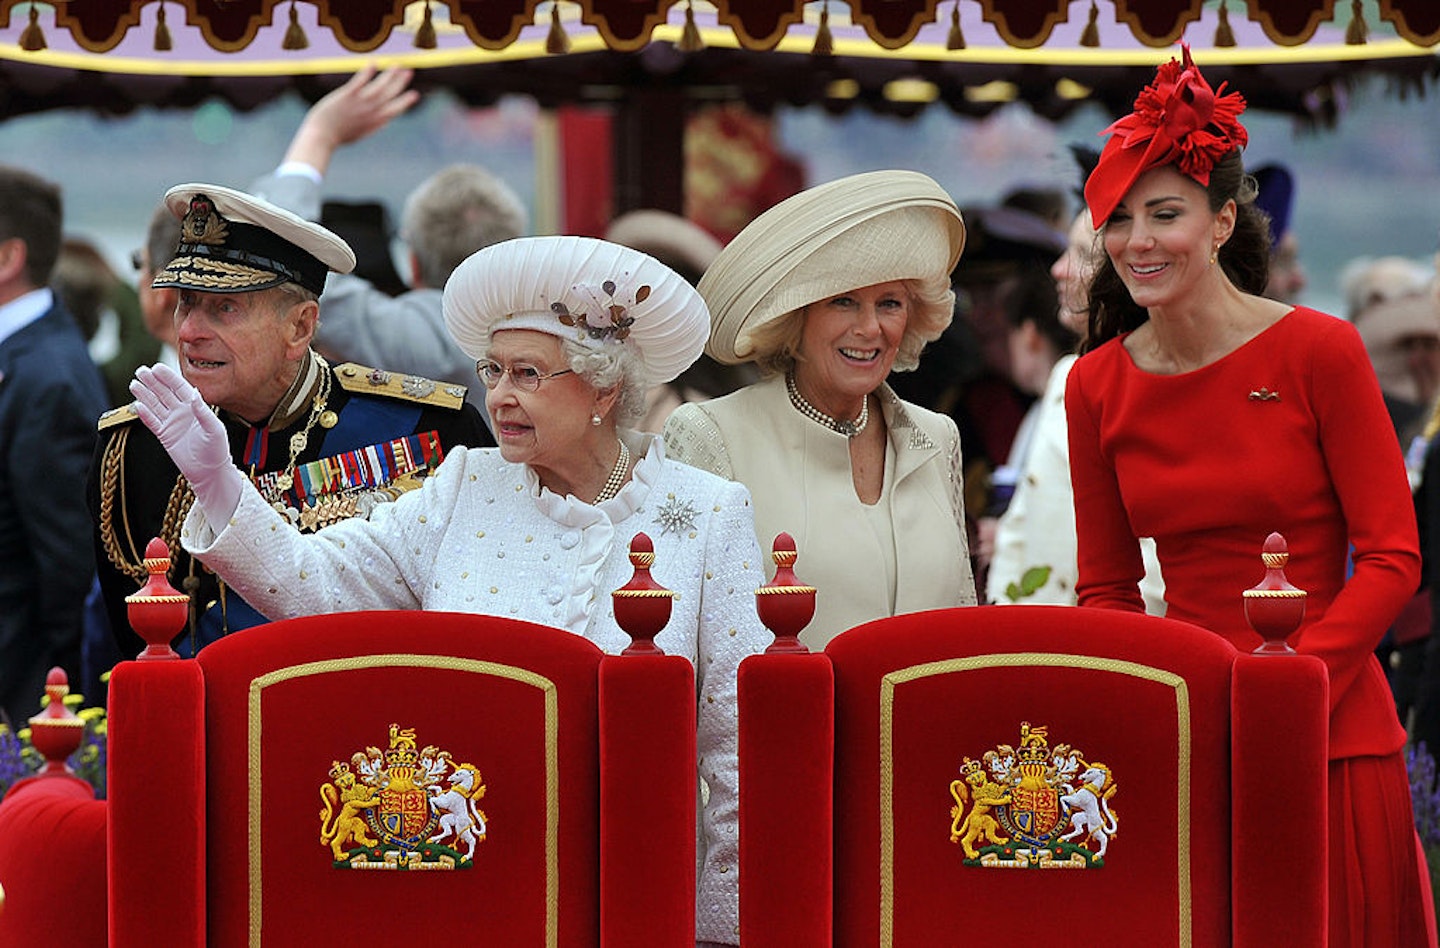 rince Philip, The Duke of Edinburgh, Queen Elizabeth II, Camilla, Duchess of Cornwall, and Catherine, Duchess of Cambridge onboard the Spirit of Chartwell during the Diamond Jubilee